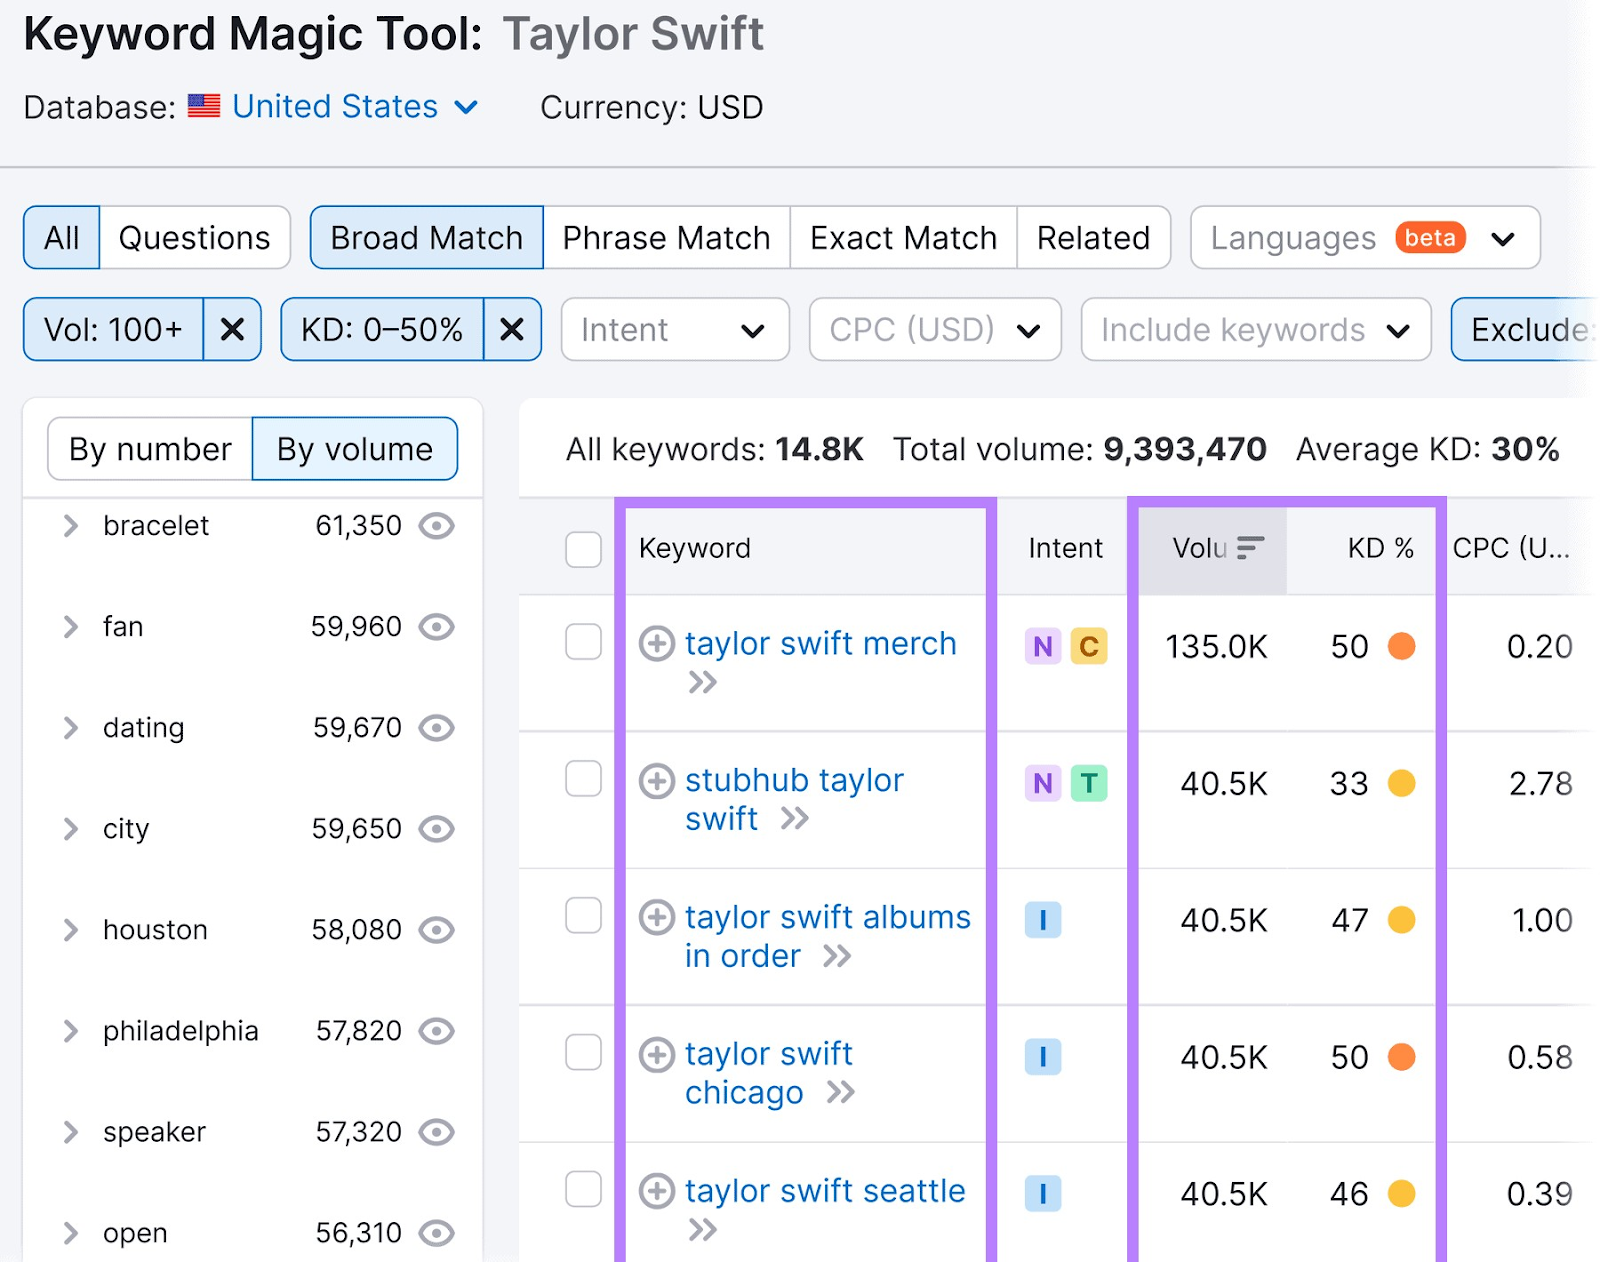 Filtered results for "Taylor Swift" search in Keyword Magic